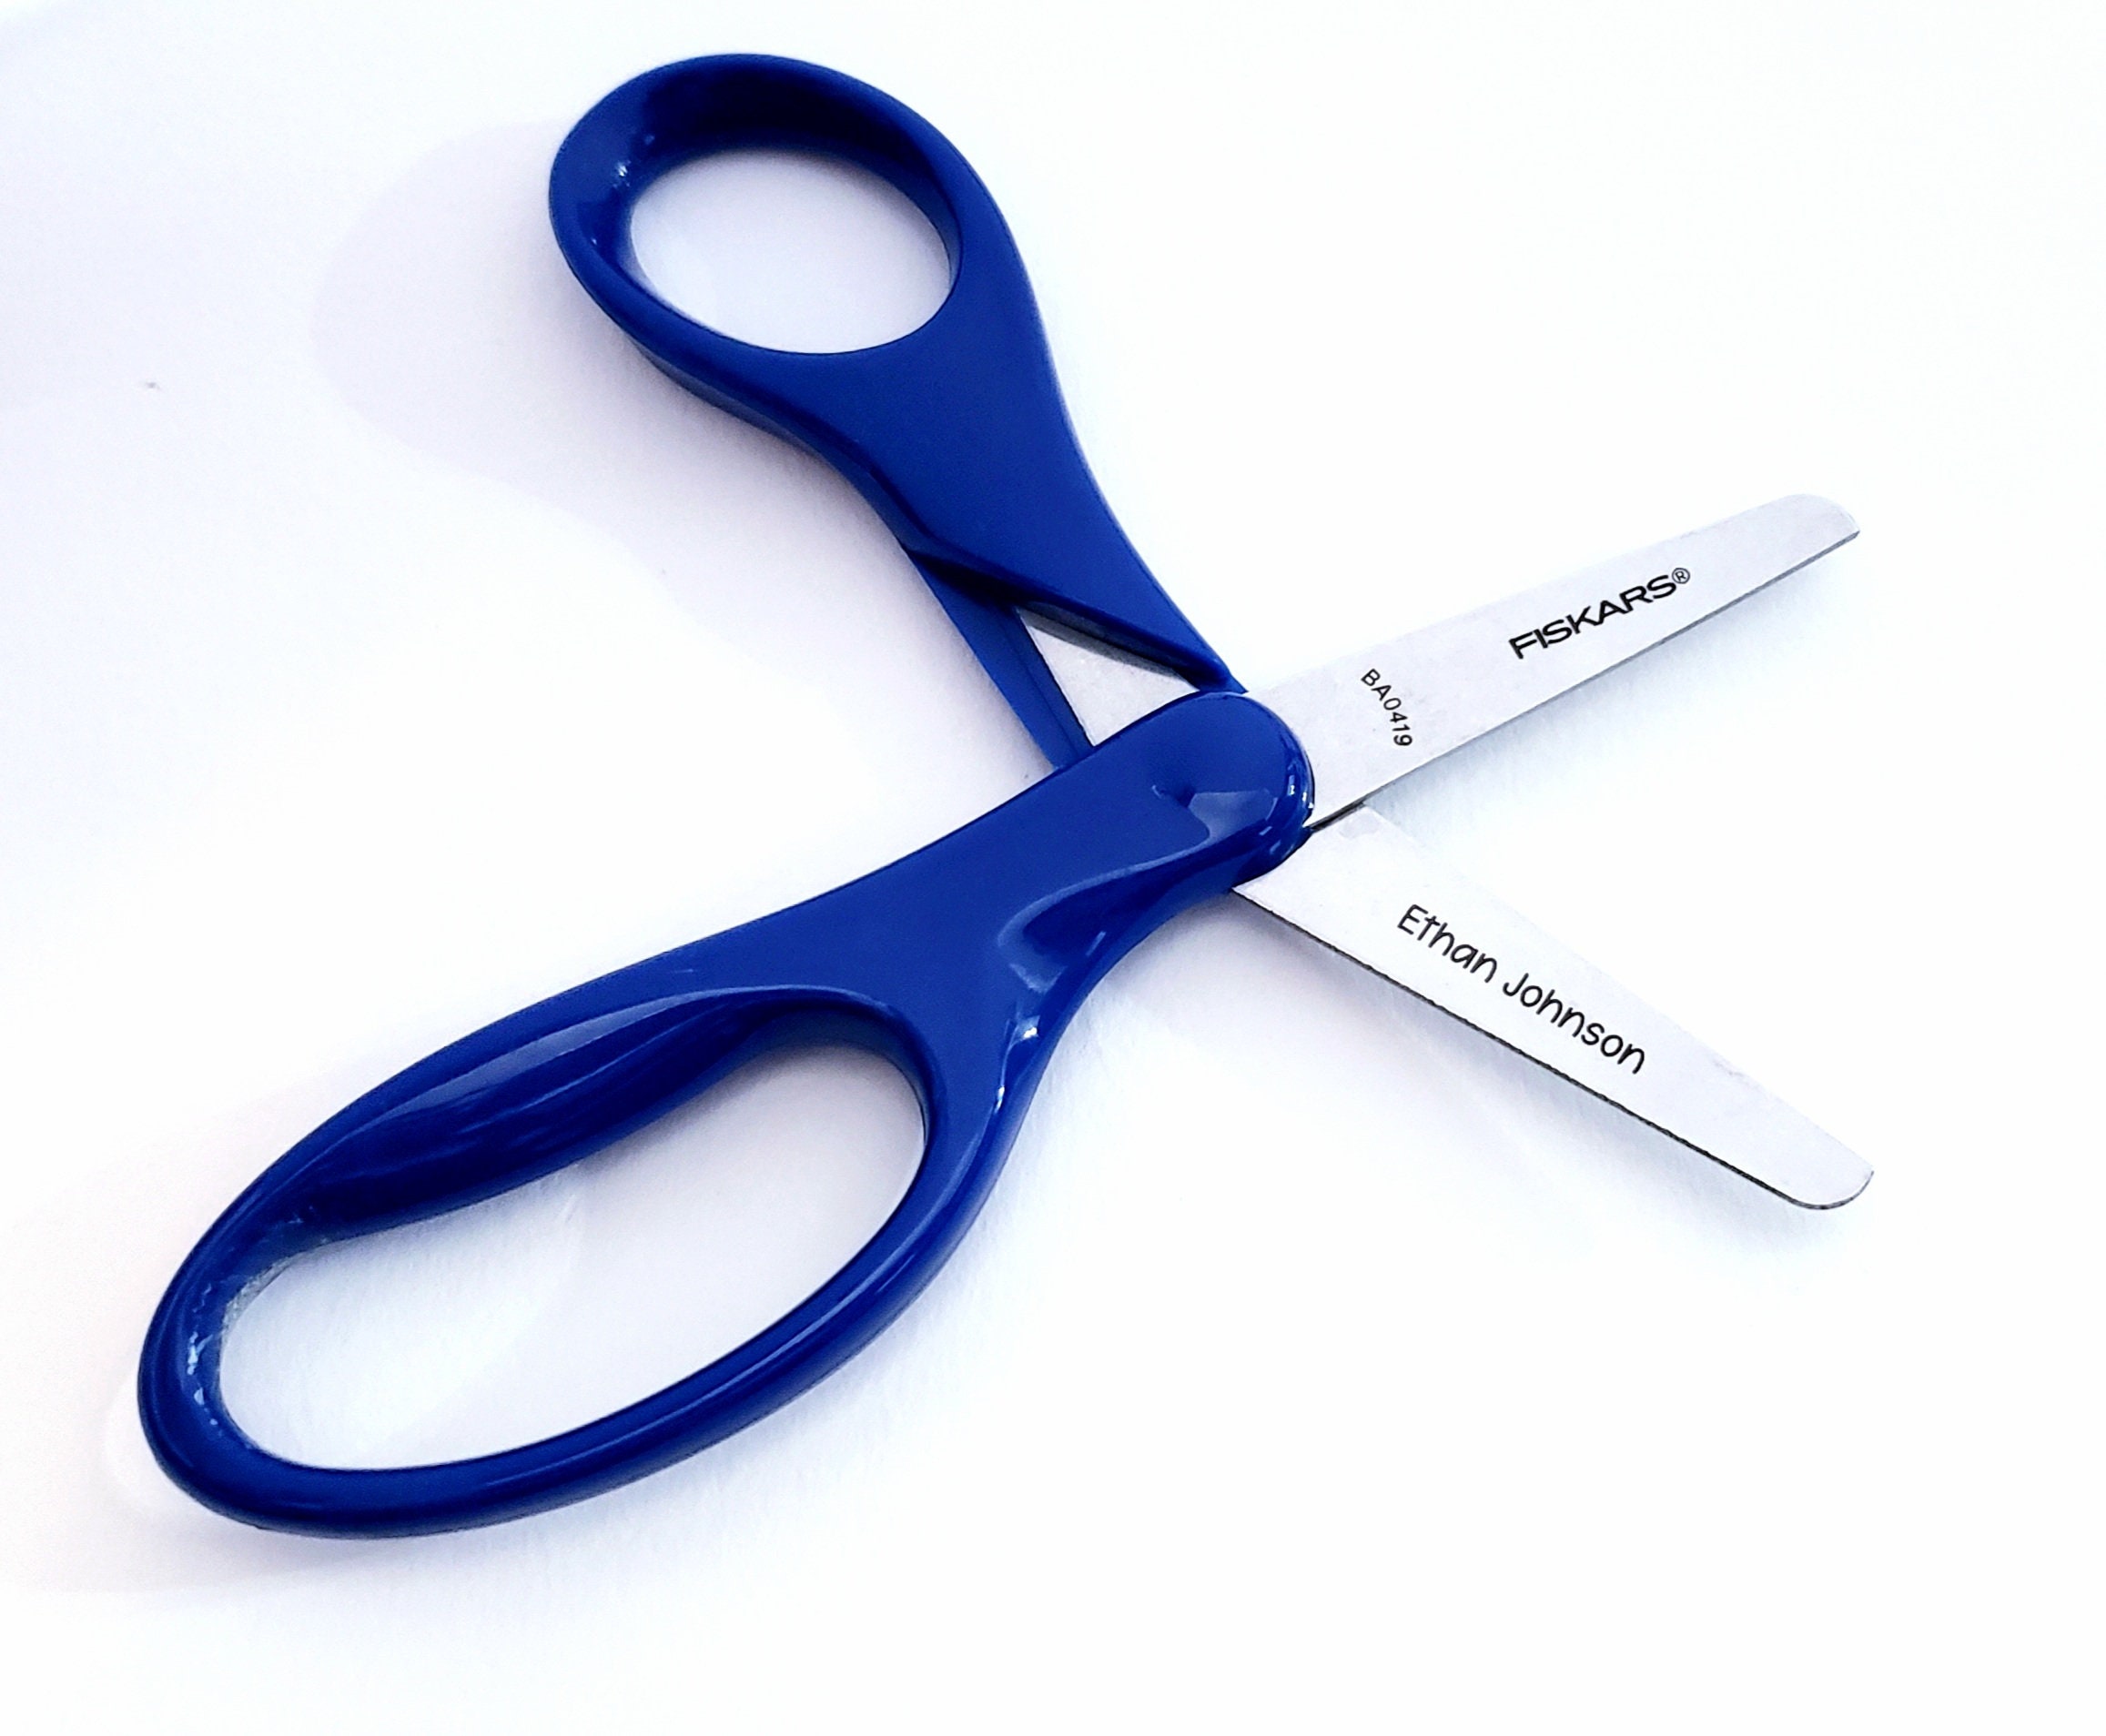 Kids Scissors Engraved and Personalized With Child's Name Choose